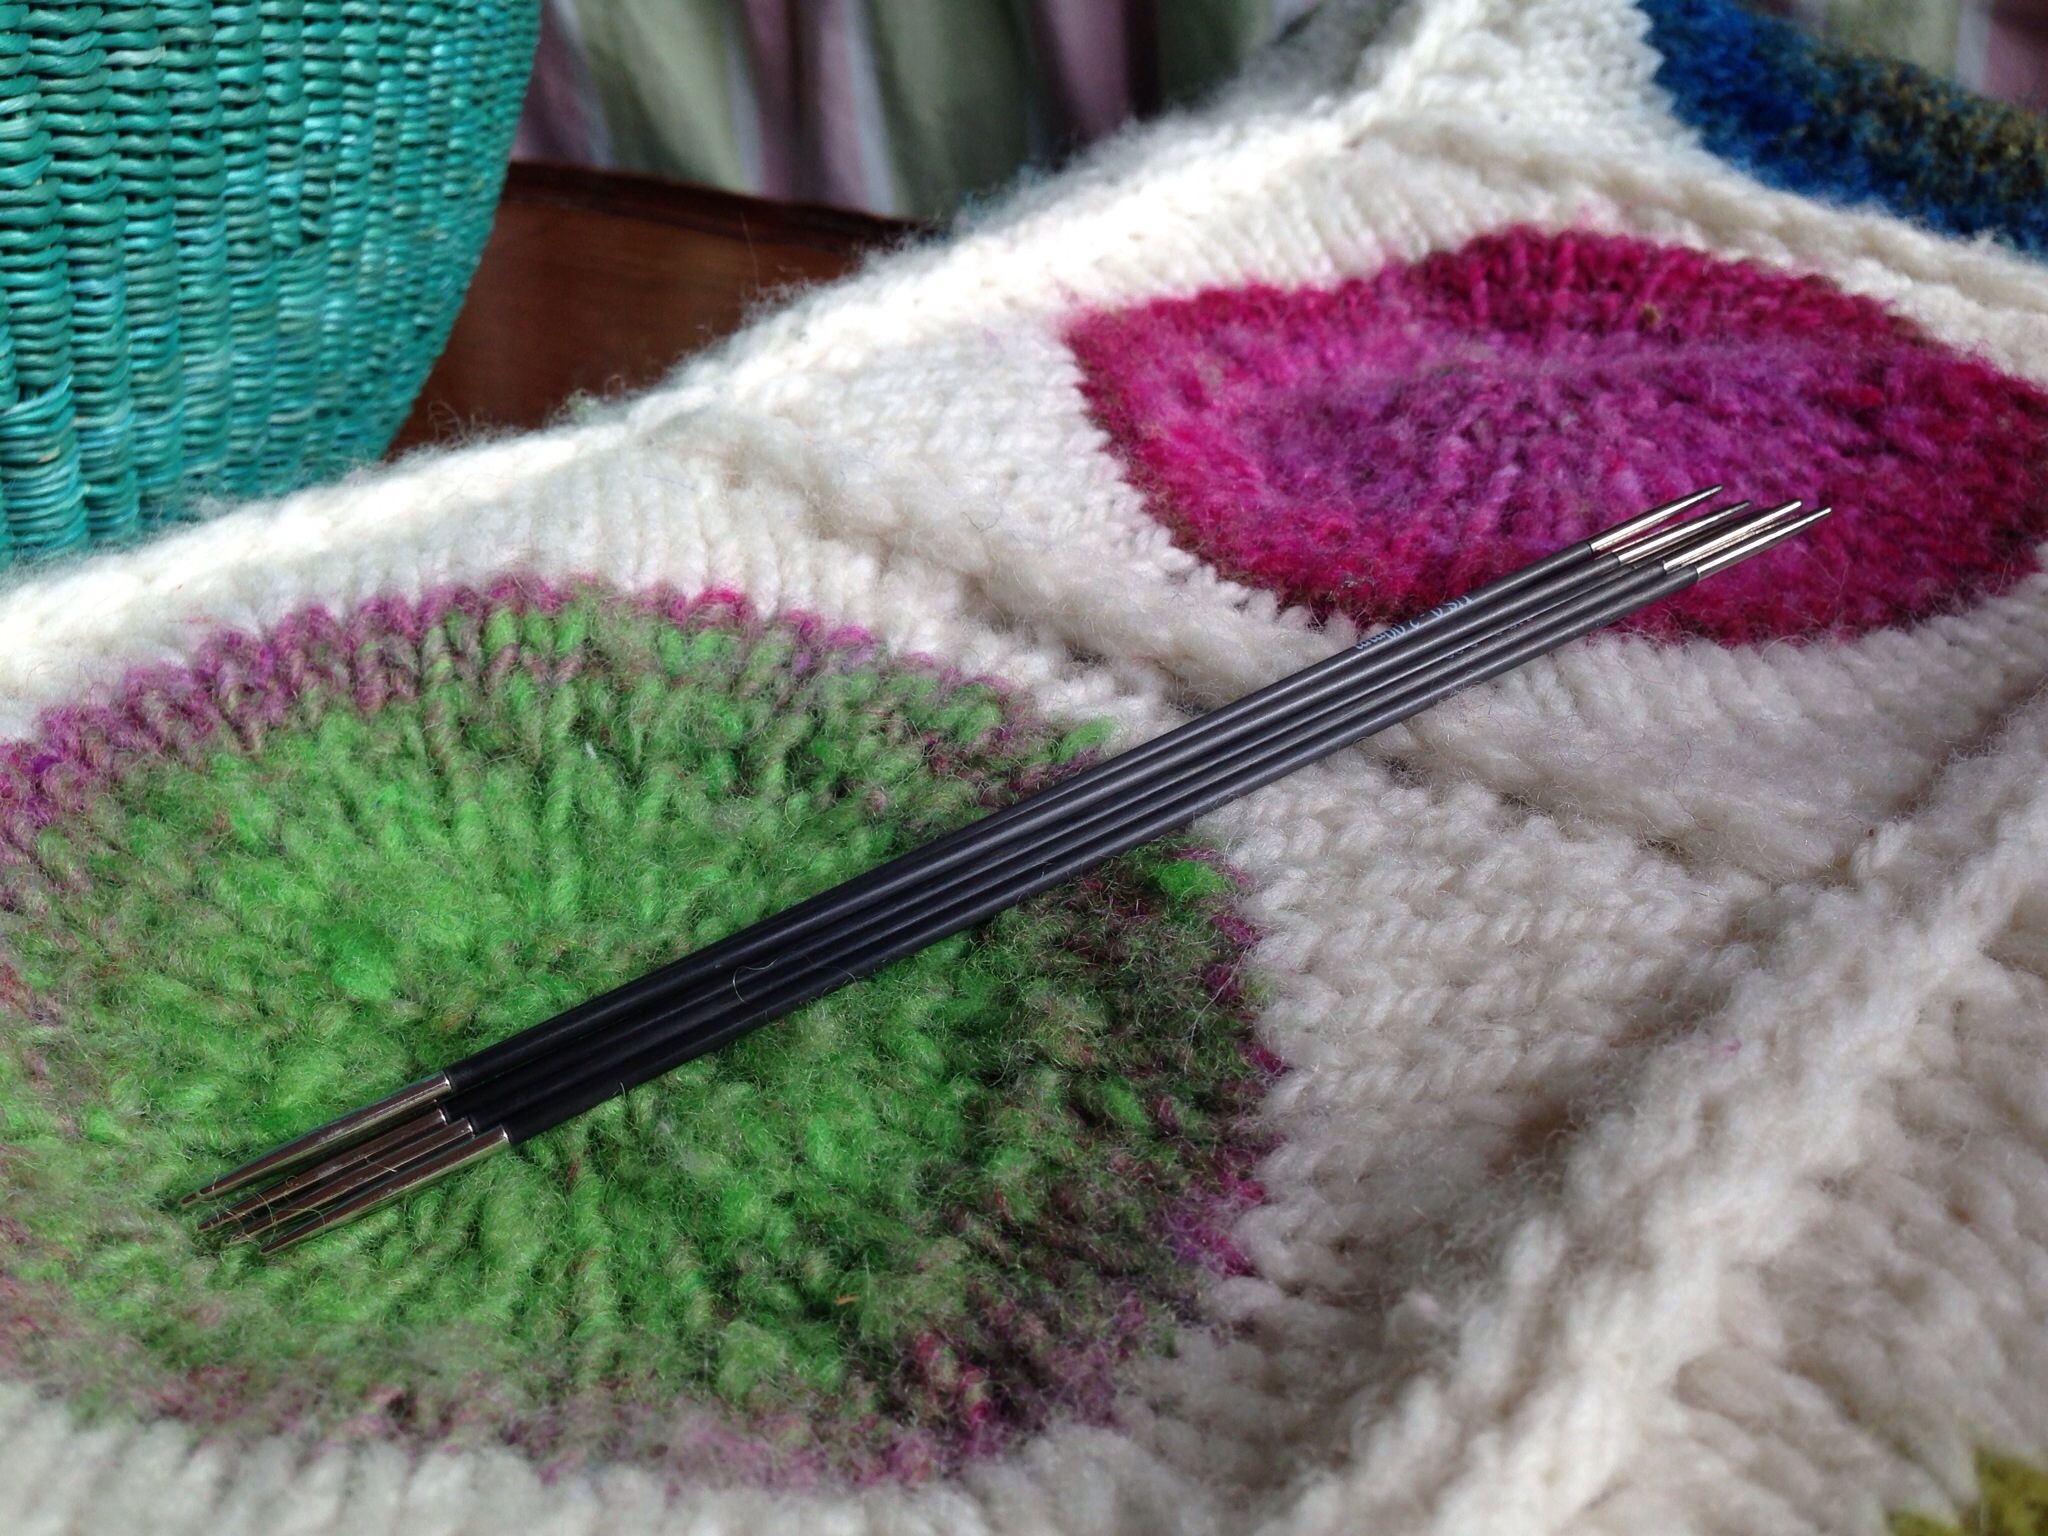 Knitter's Pride Basix 8 Double Point Needles